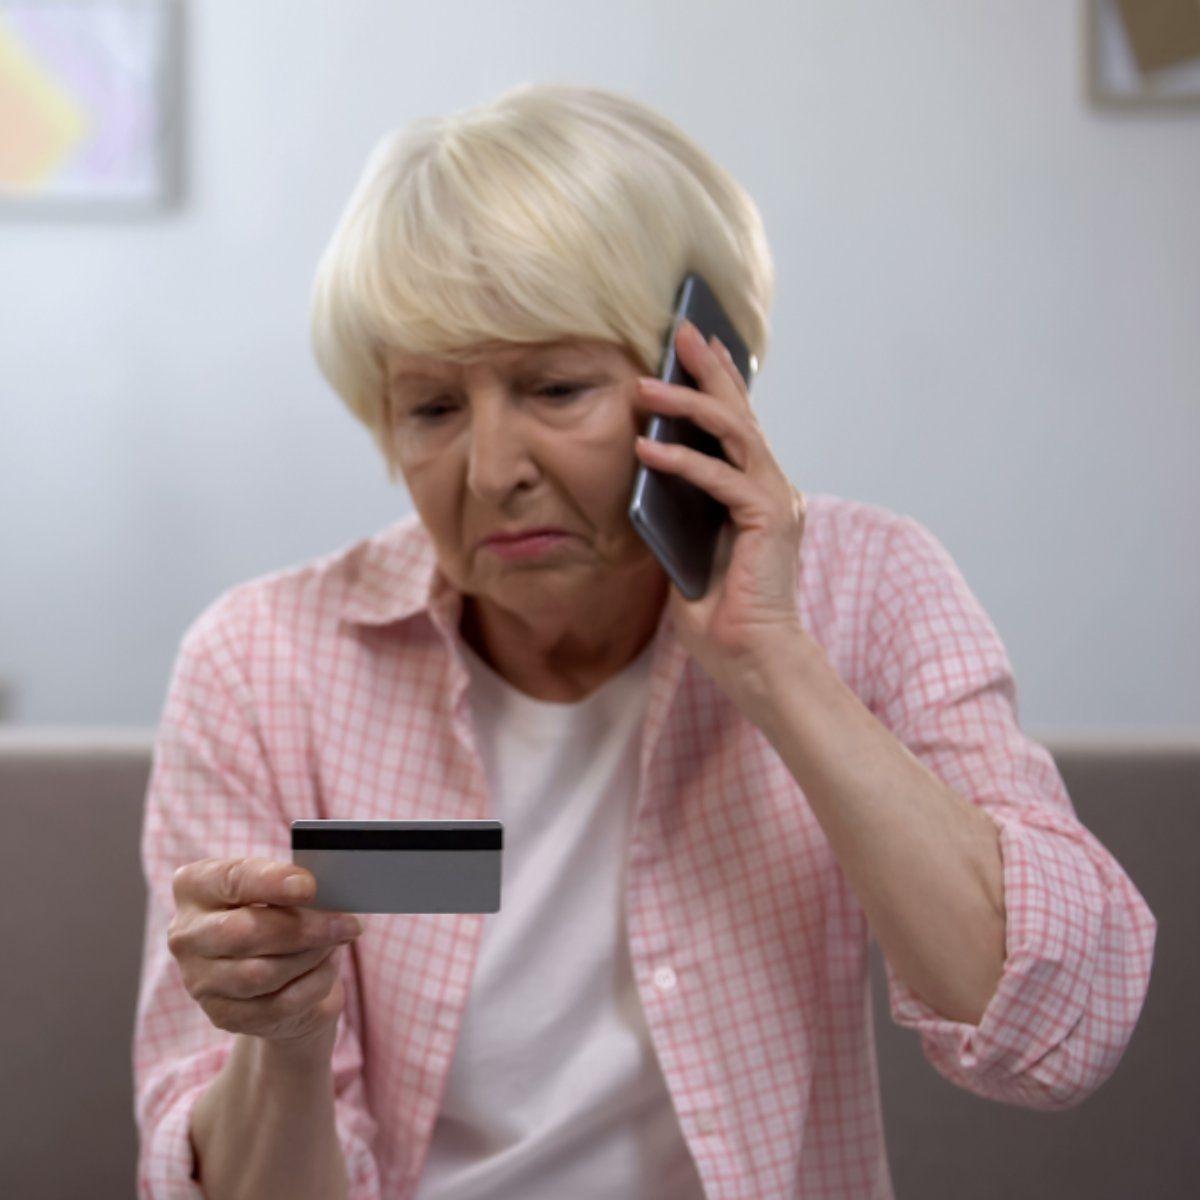 Senior lady looks upset on the phone as she looks at her credit card